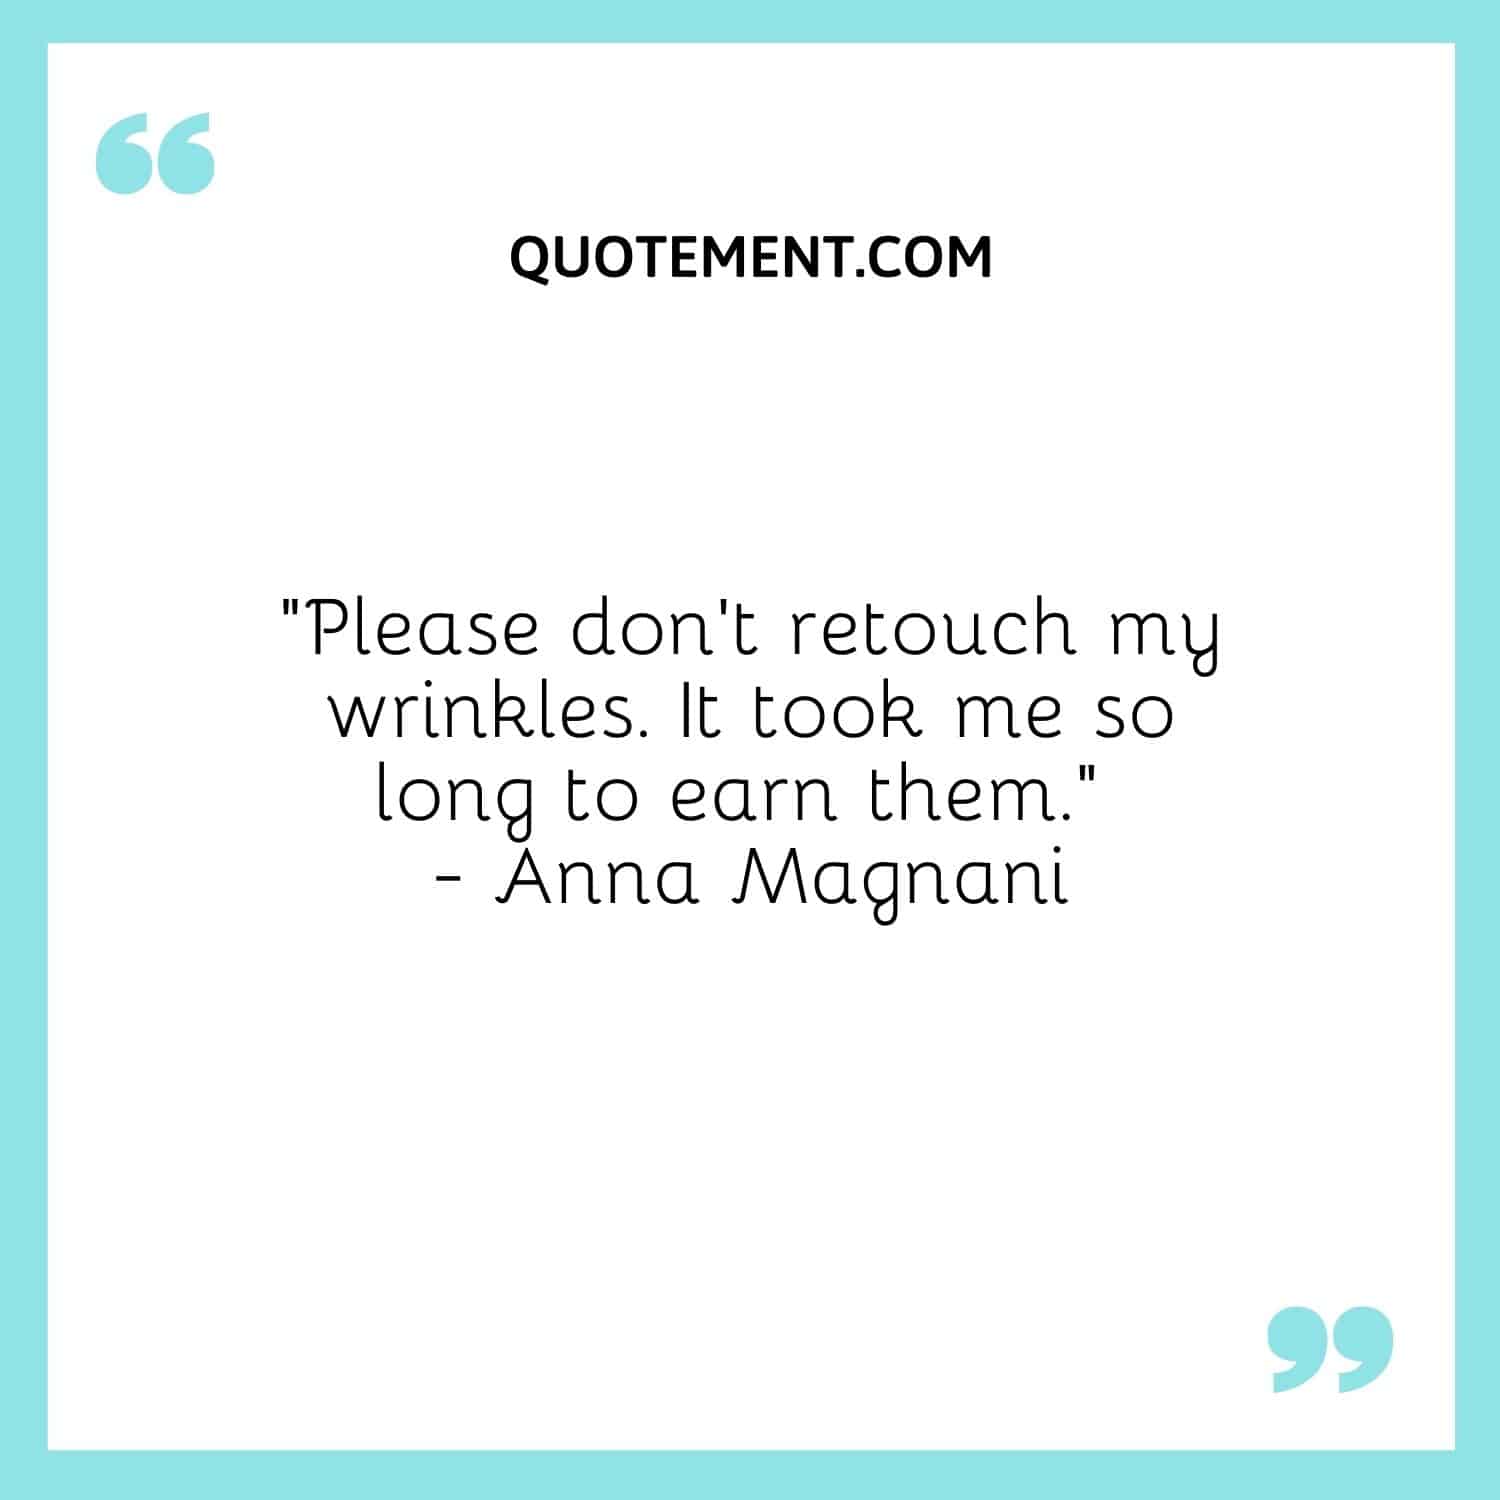 “Please don’t retouch my wrinkles. It took me so long to earn them.” — Anna Magnani